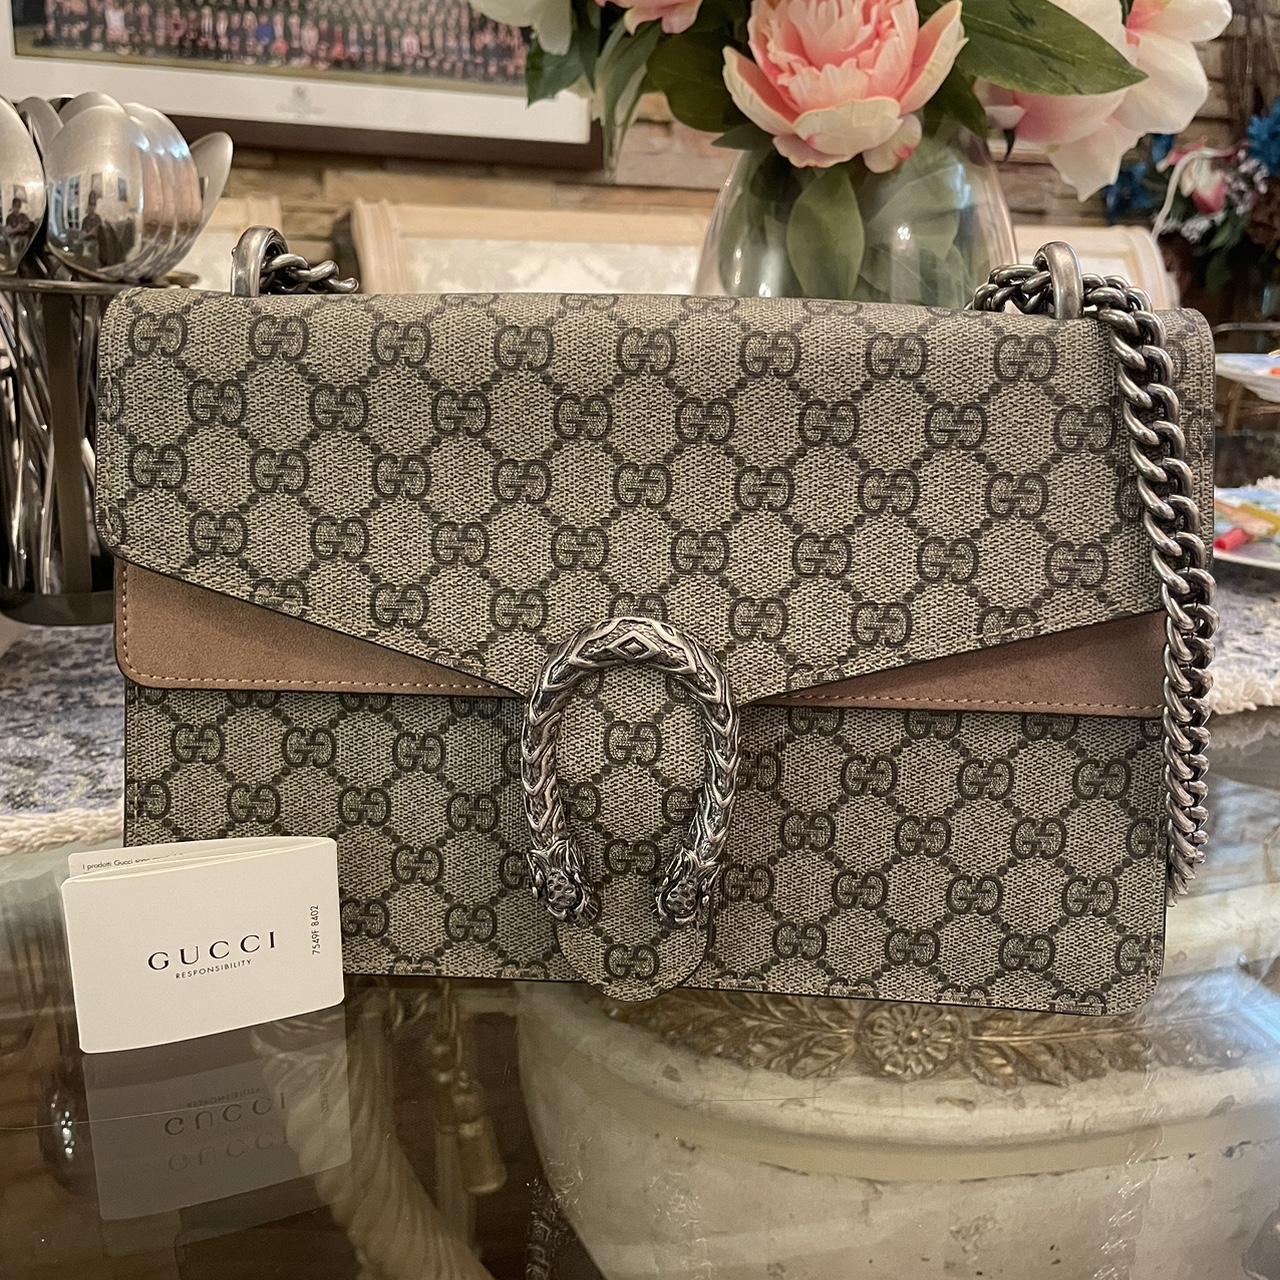 Gucci Dionysus GG Bag In good condition Has some... - Depop